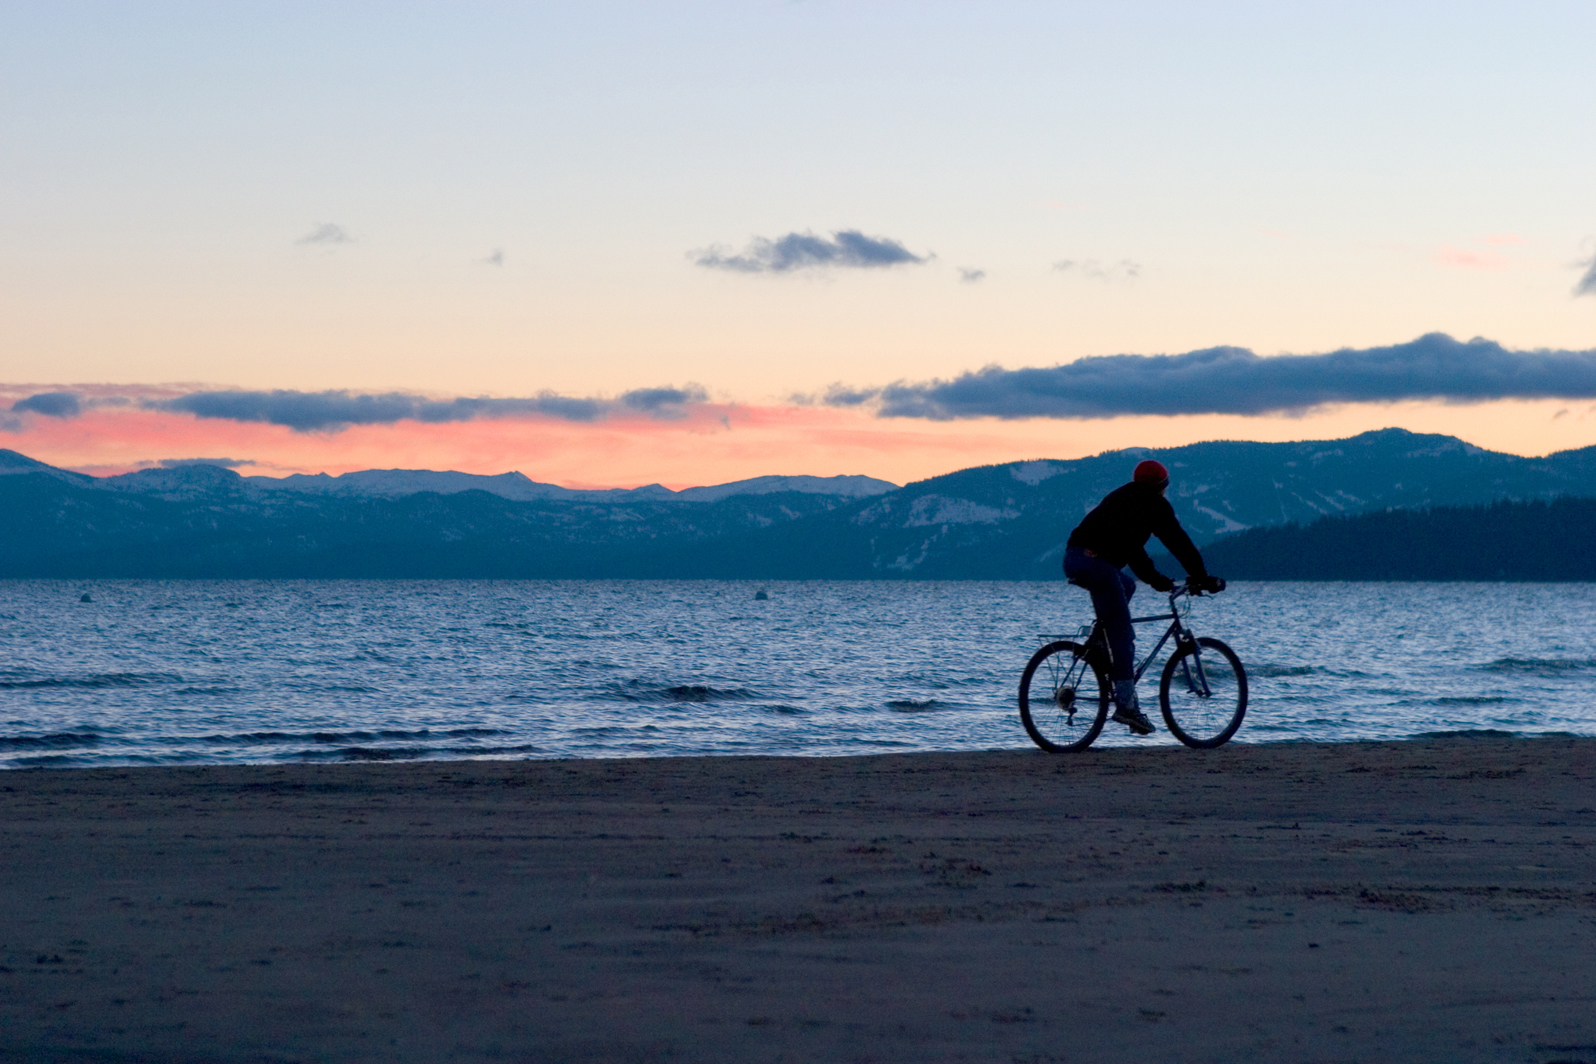 Summer in Lake Tahoe is ideal for bicycling, including cruising town on The Landing’s complimentary bikes. © The Landing Resort & Spa